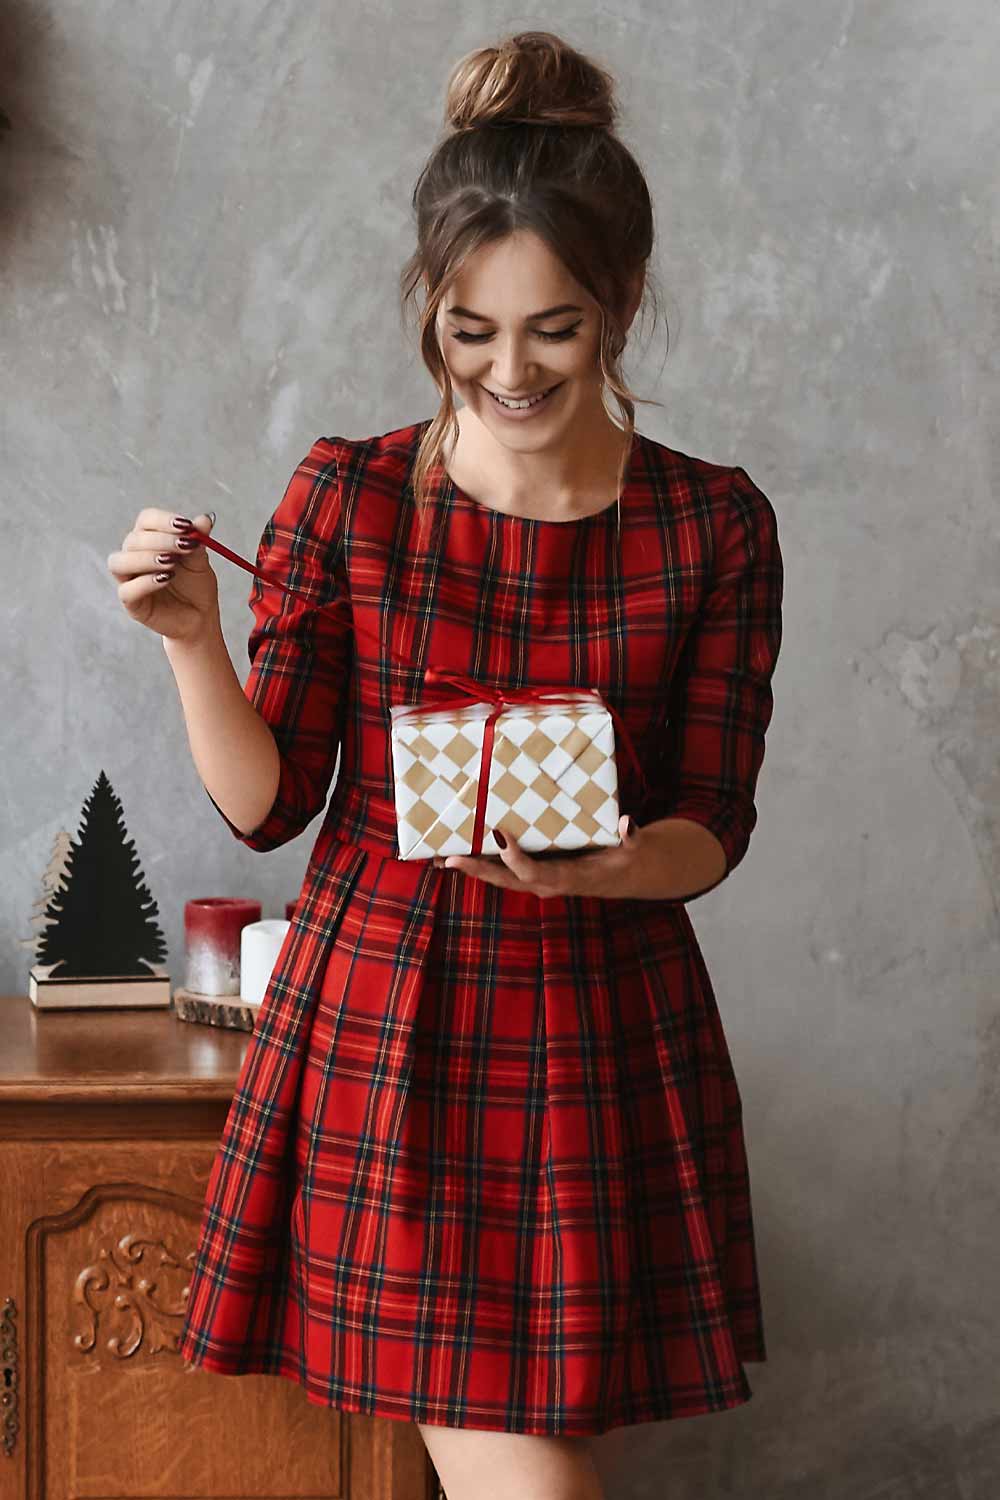 Red Patterned Christmas Dress